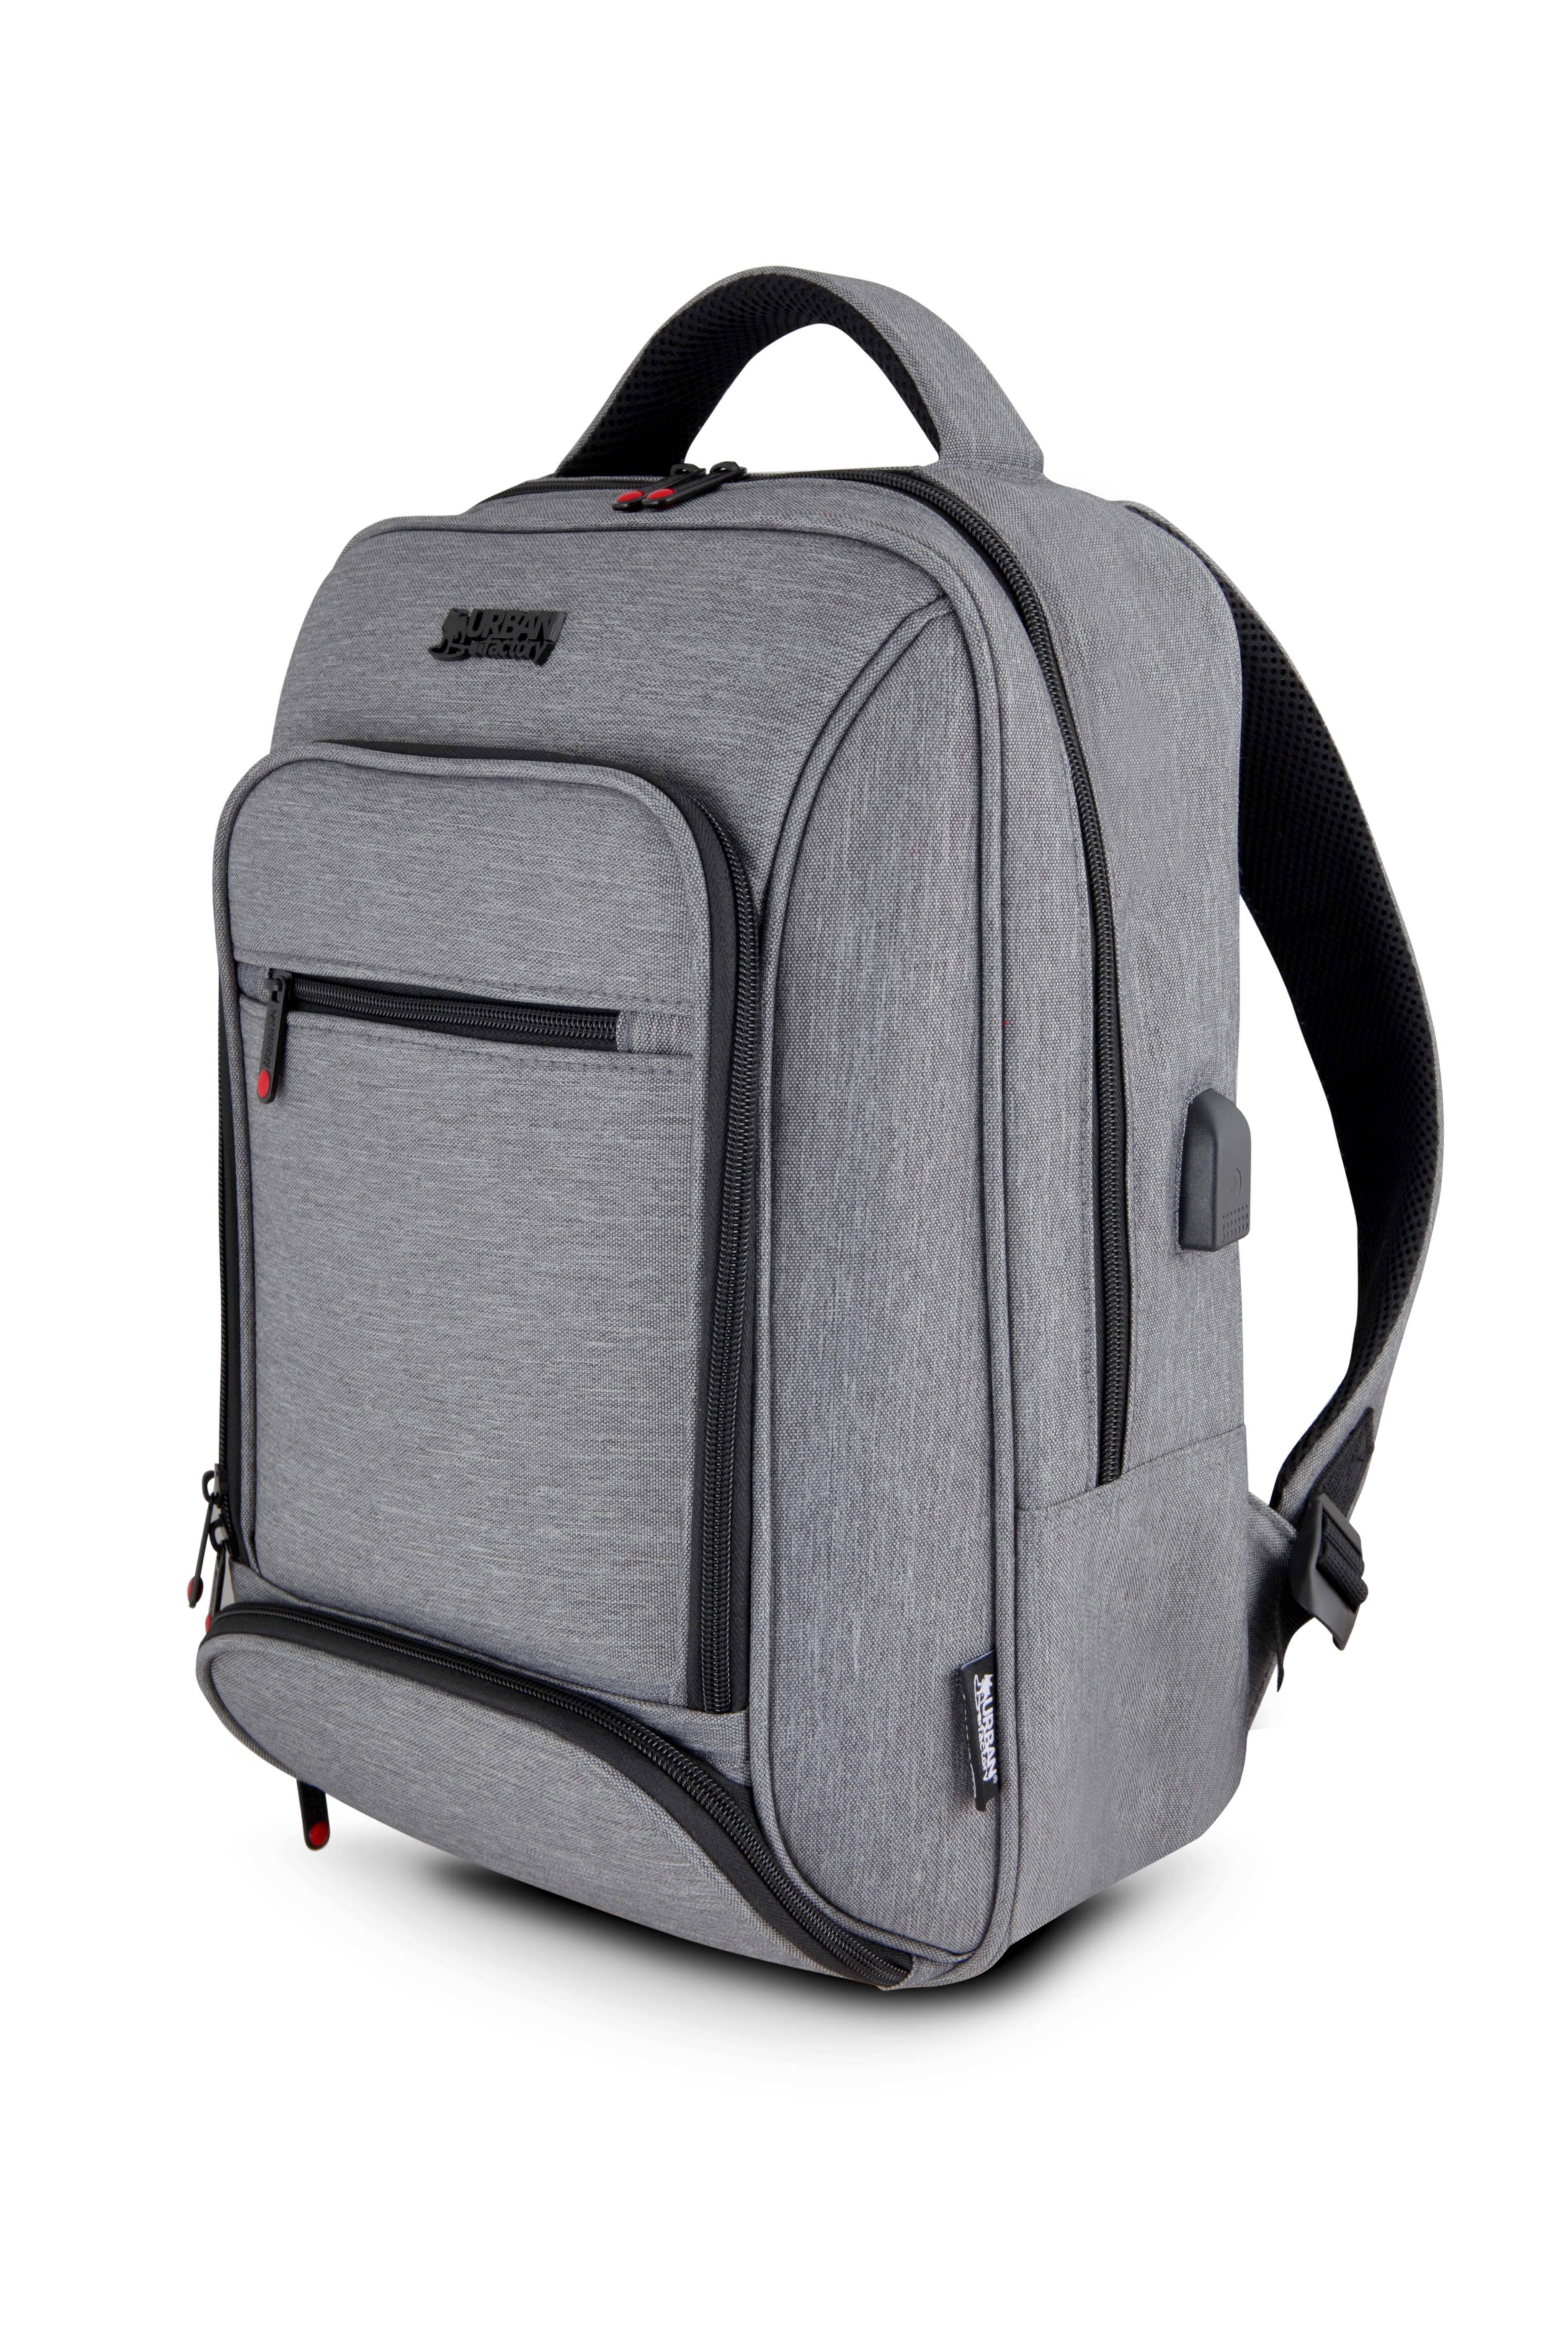 Rca Informatique - Image du produit : MIXEE EDITION BACKPACK 15.6IN COMPACT